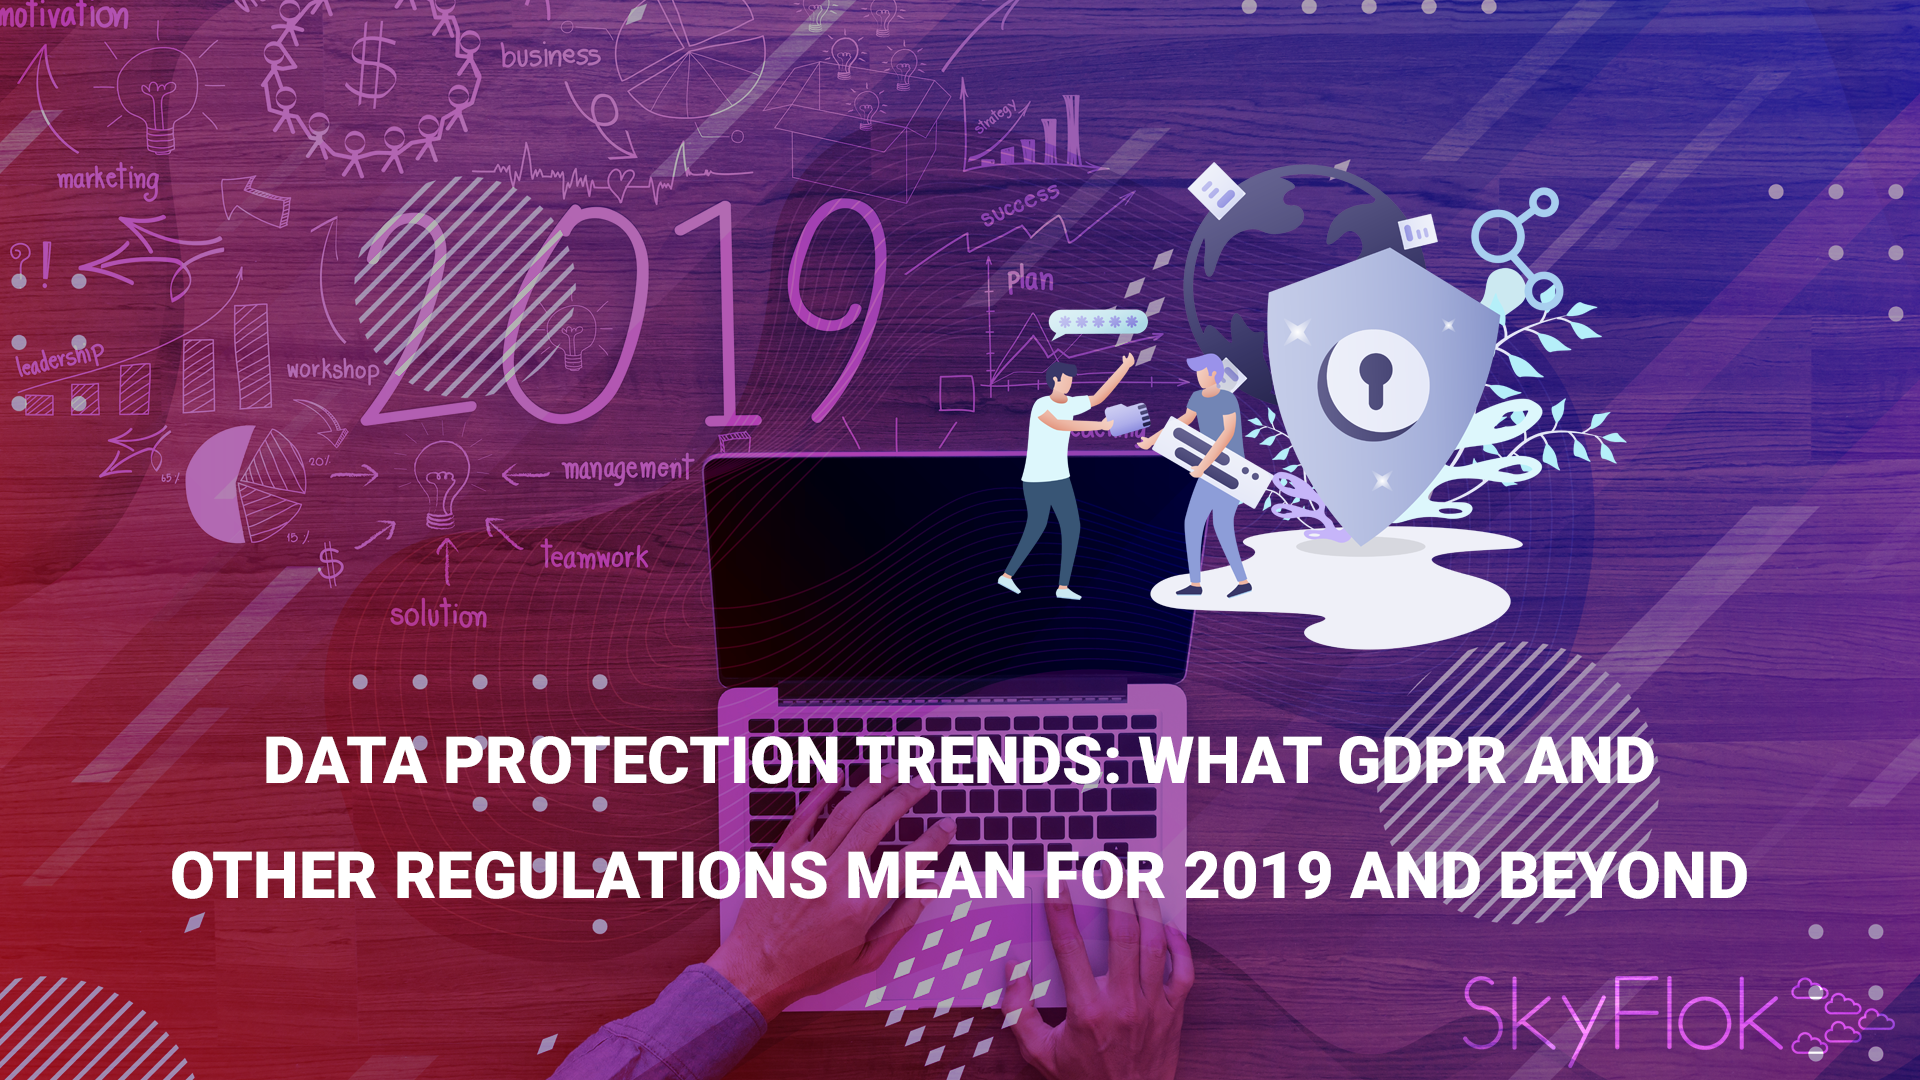 Data Protection Trends: What GDPR And Other Regulations Mean For 2019 And Beyond